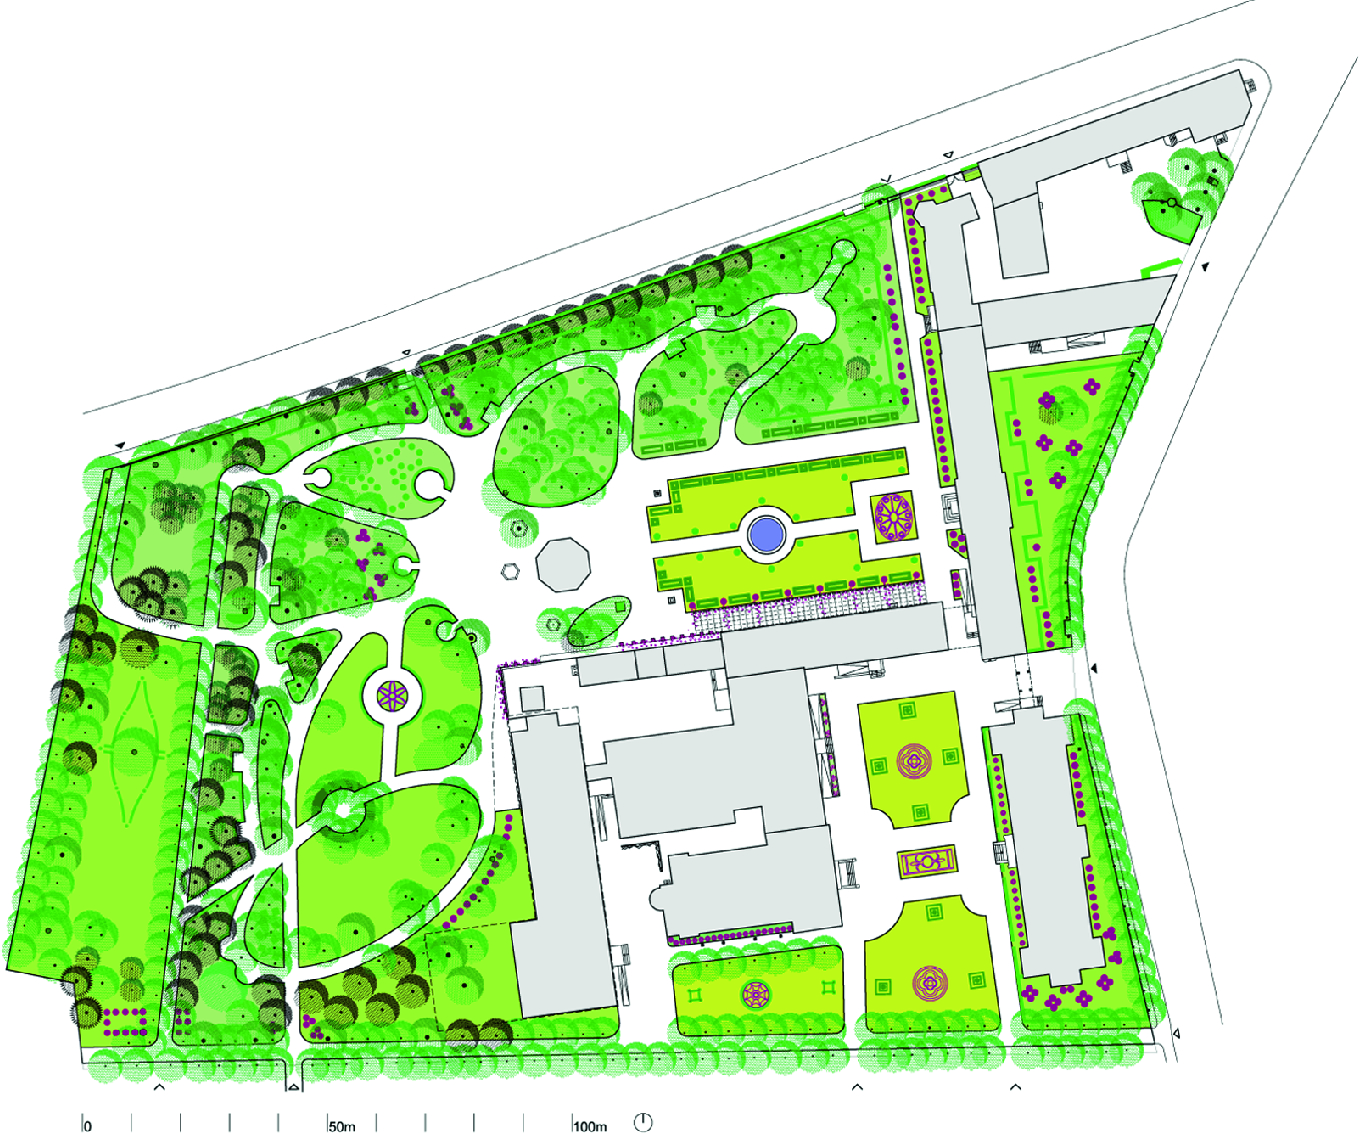 Revitalisation Of Historic Gardens Sustainable Models Of Renewal